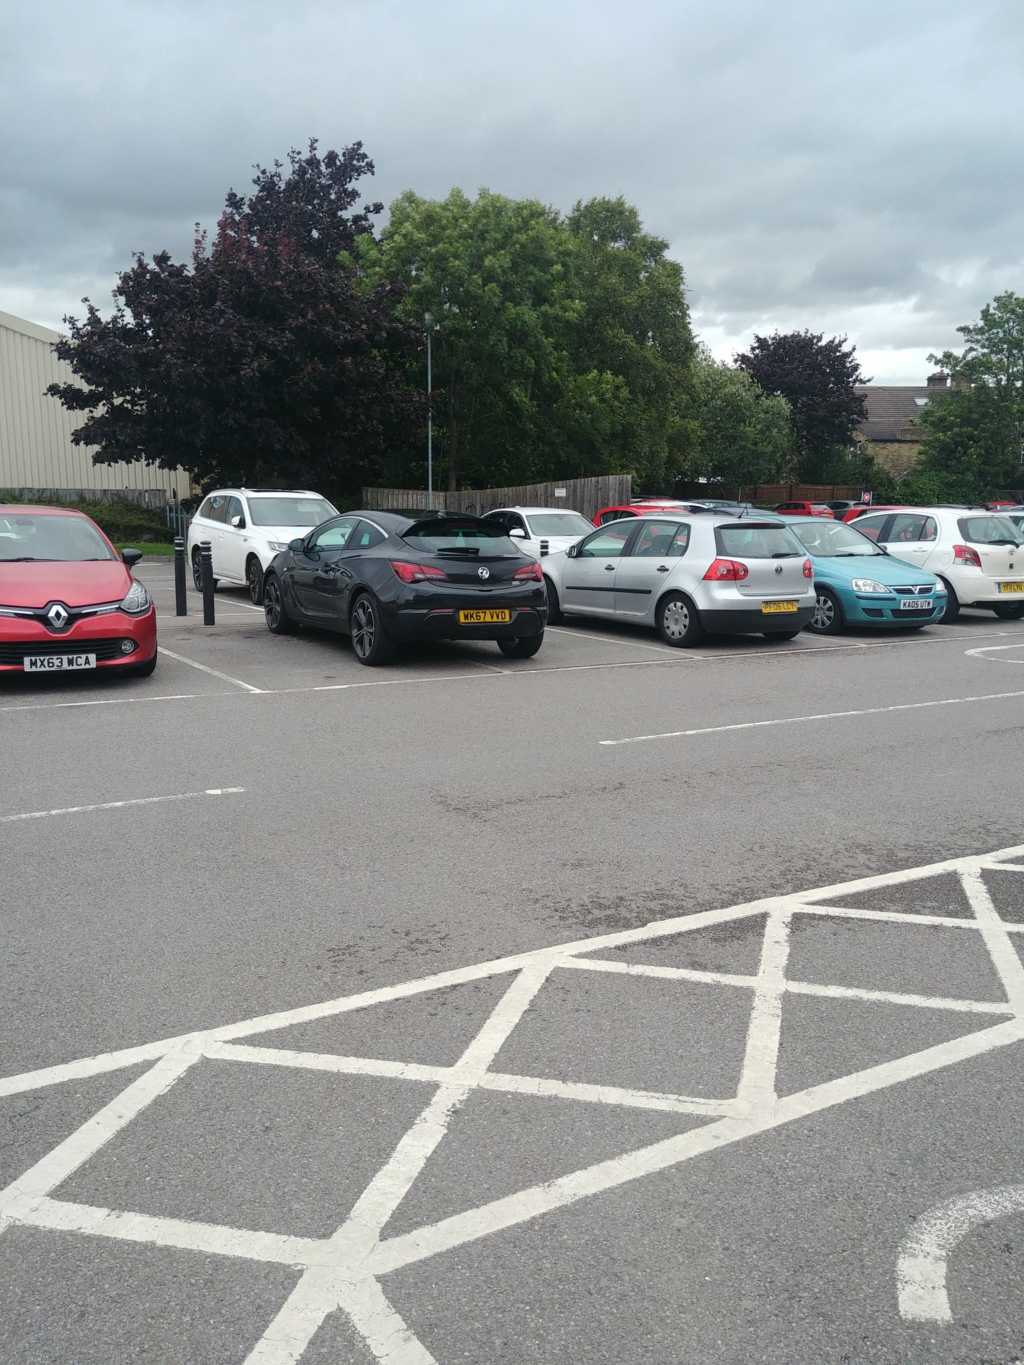 WK67 VVD is an Inconsiderate Parker